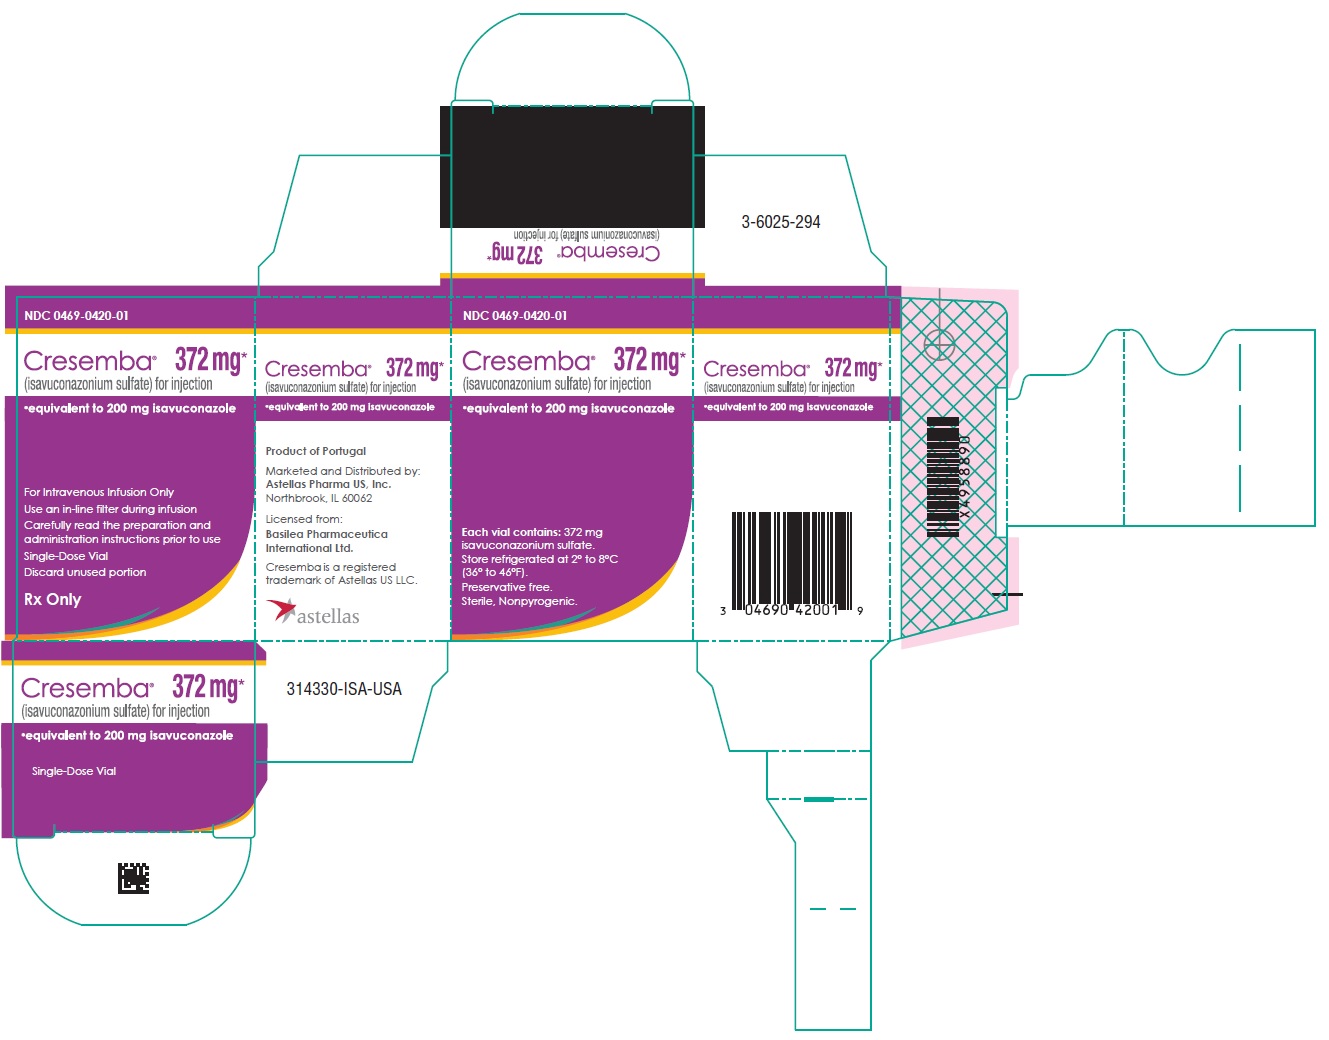 Cresemba (isavuconazonium sulfate) for injection 372 mg individual vial carton label